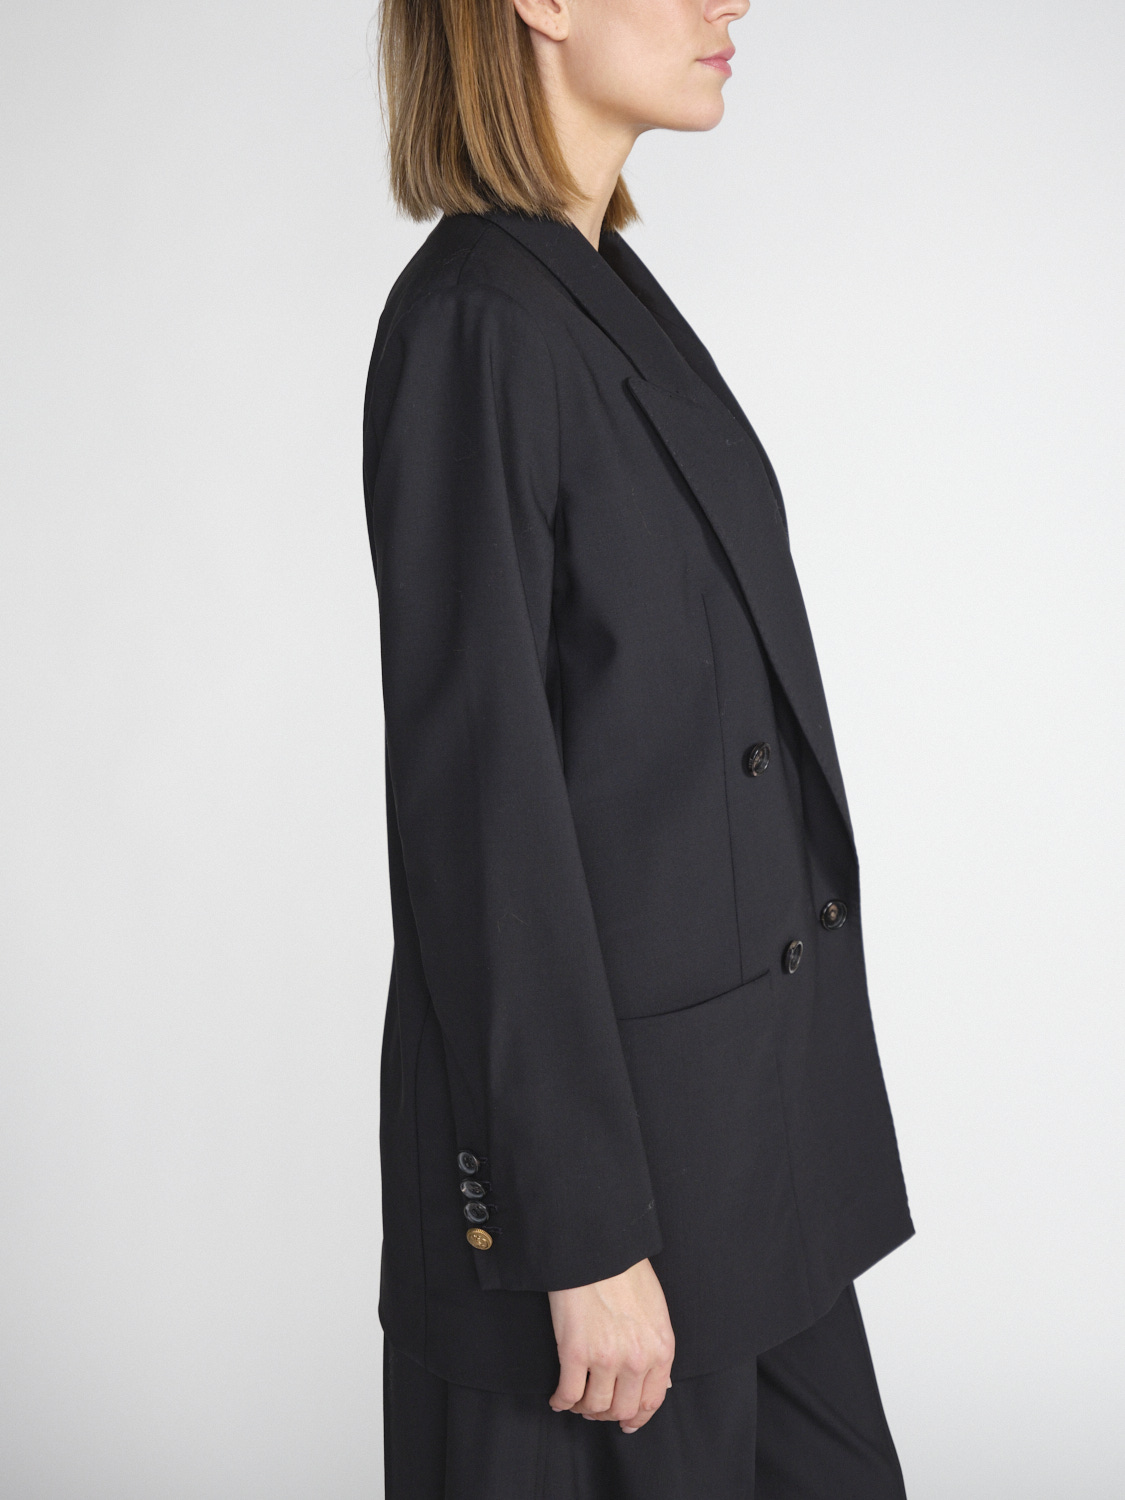 Lorena Antoniazzi Double-breasted blazer in virgin wool and stretch  black 38